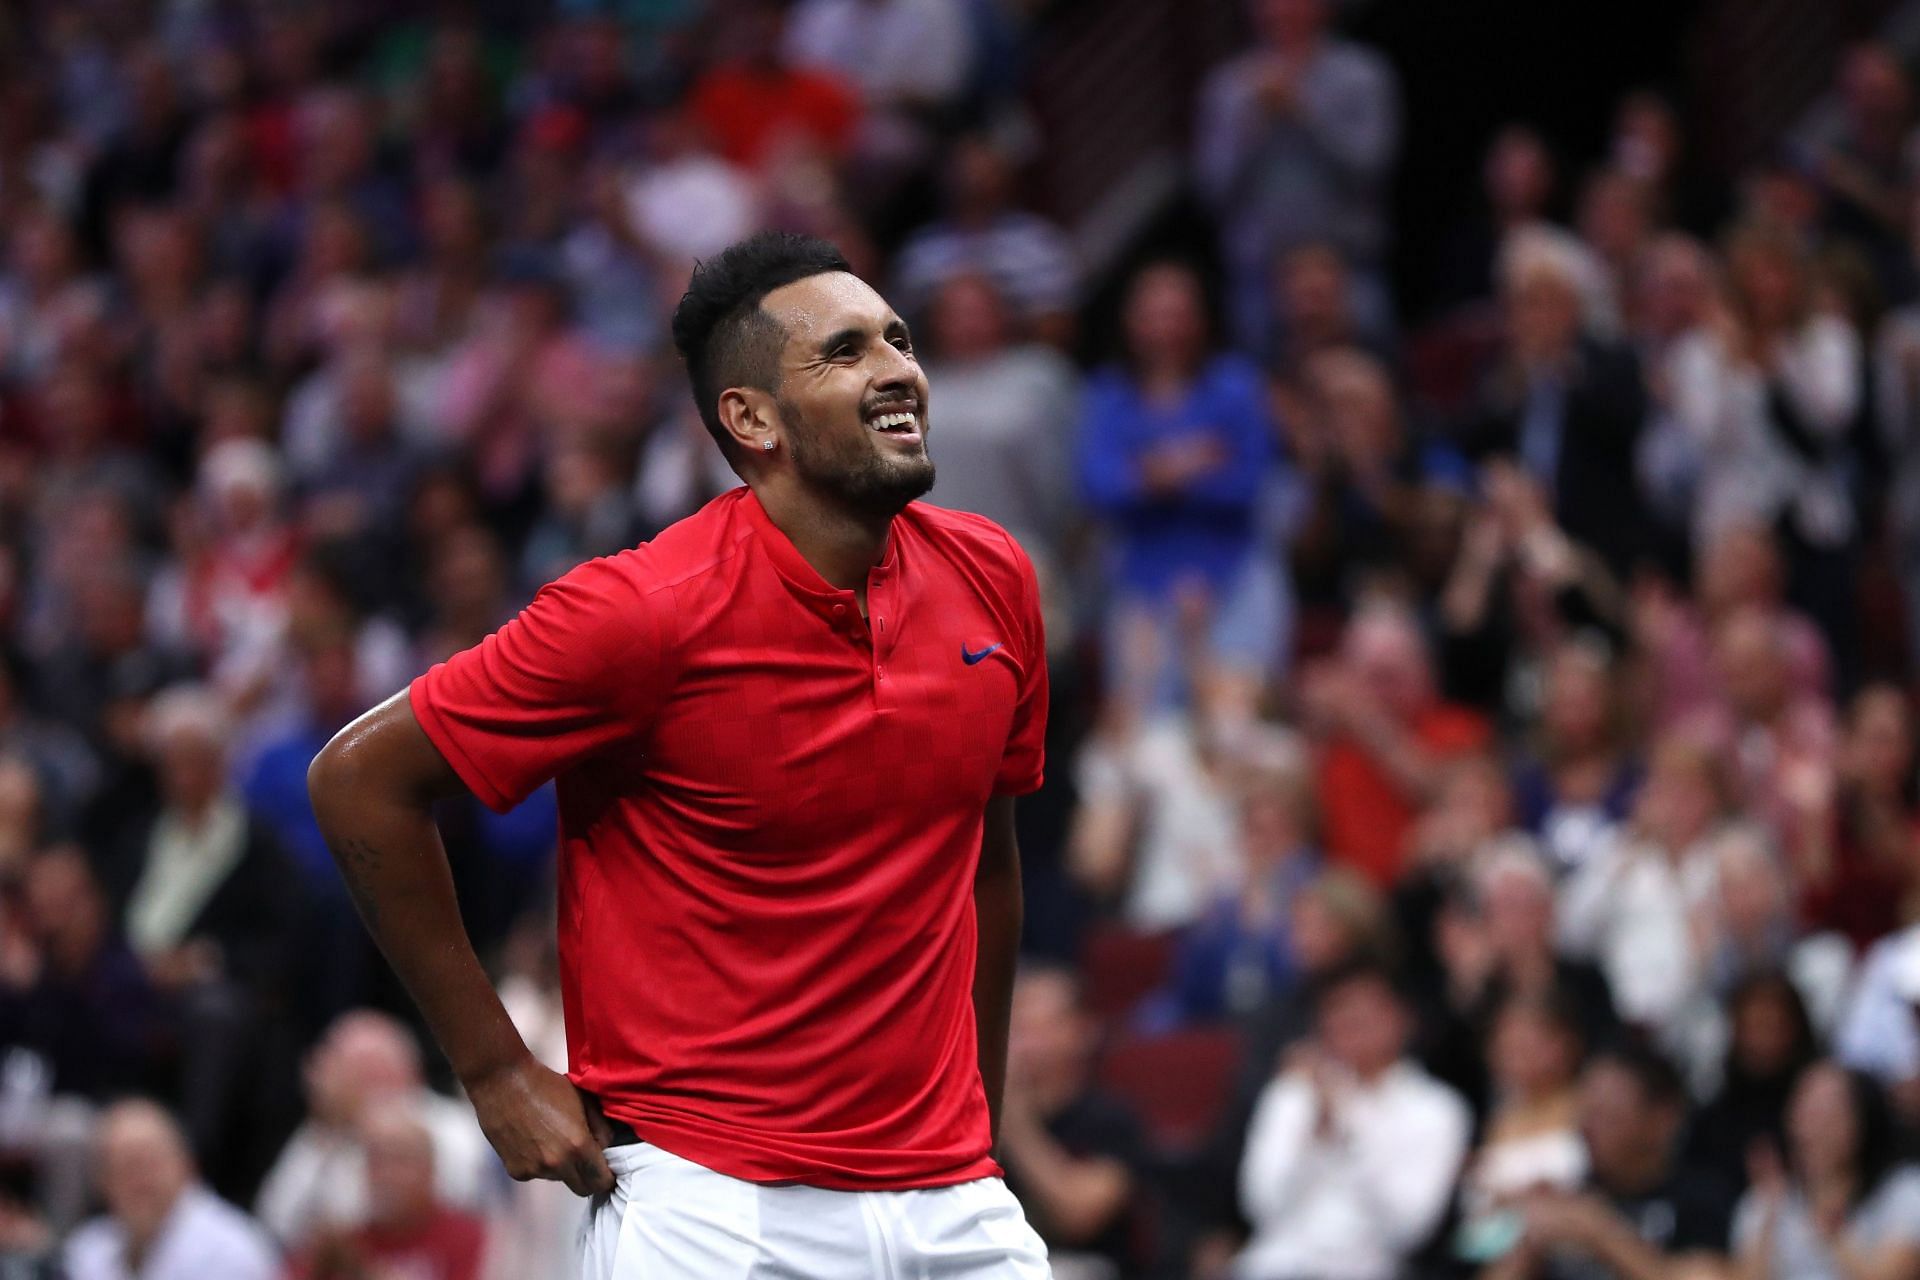 Nick Kyrgios has been accused of infidelity by Chiara Passari in the past